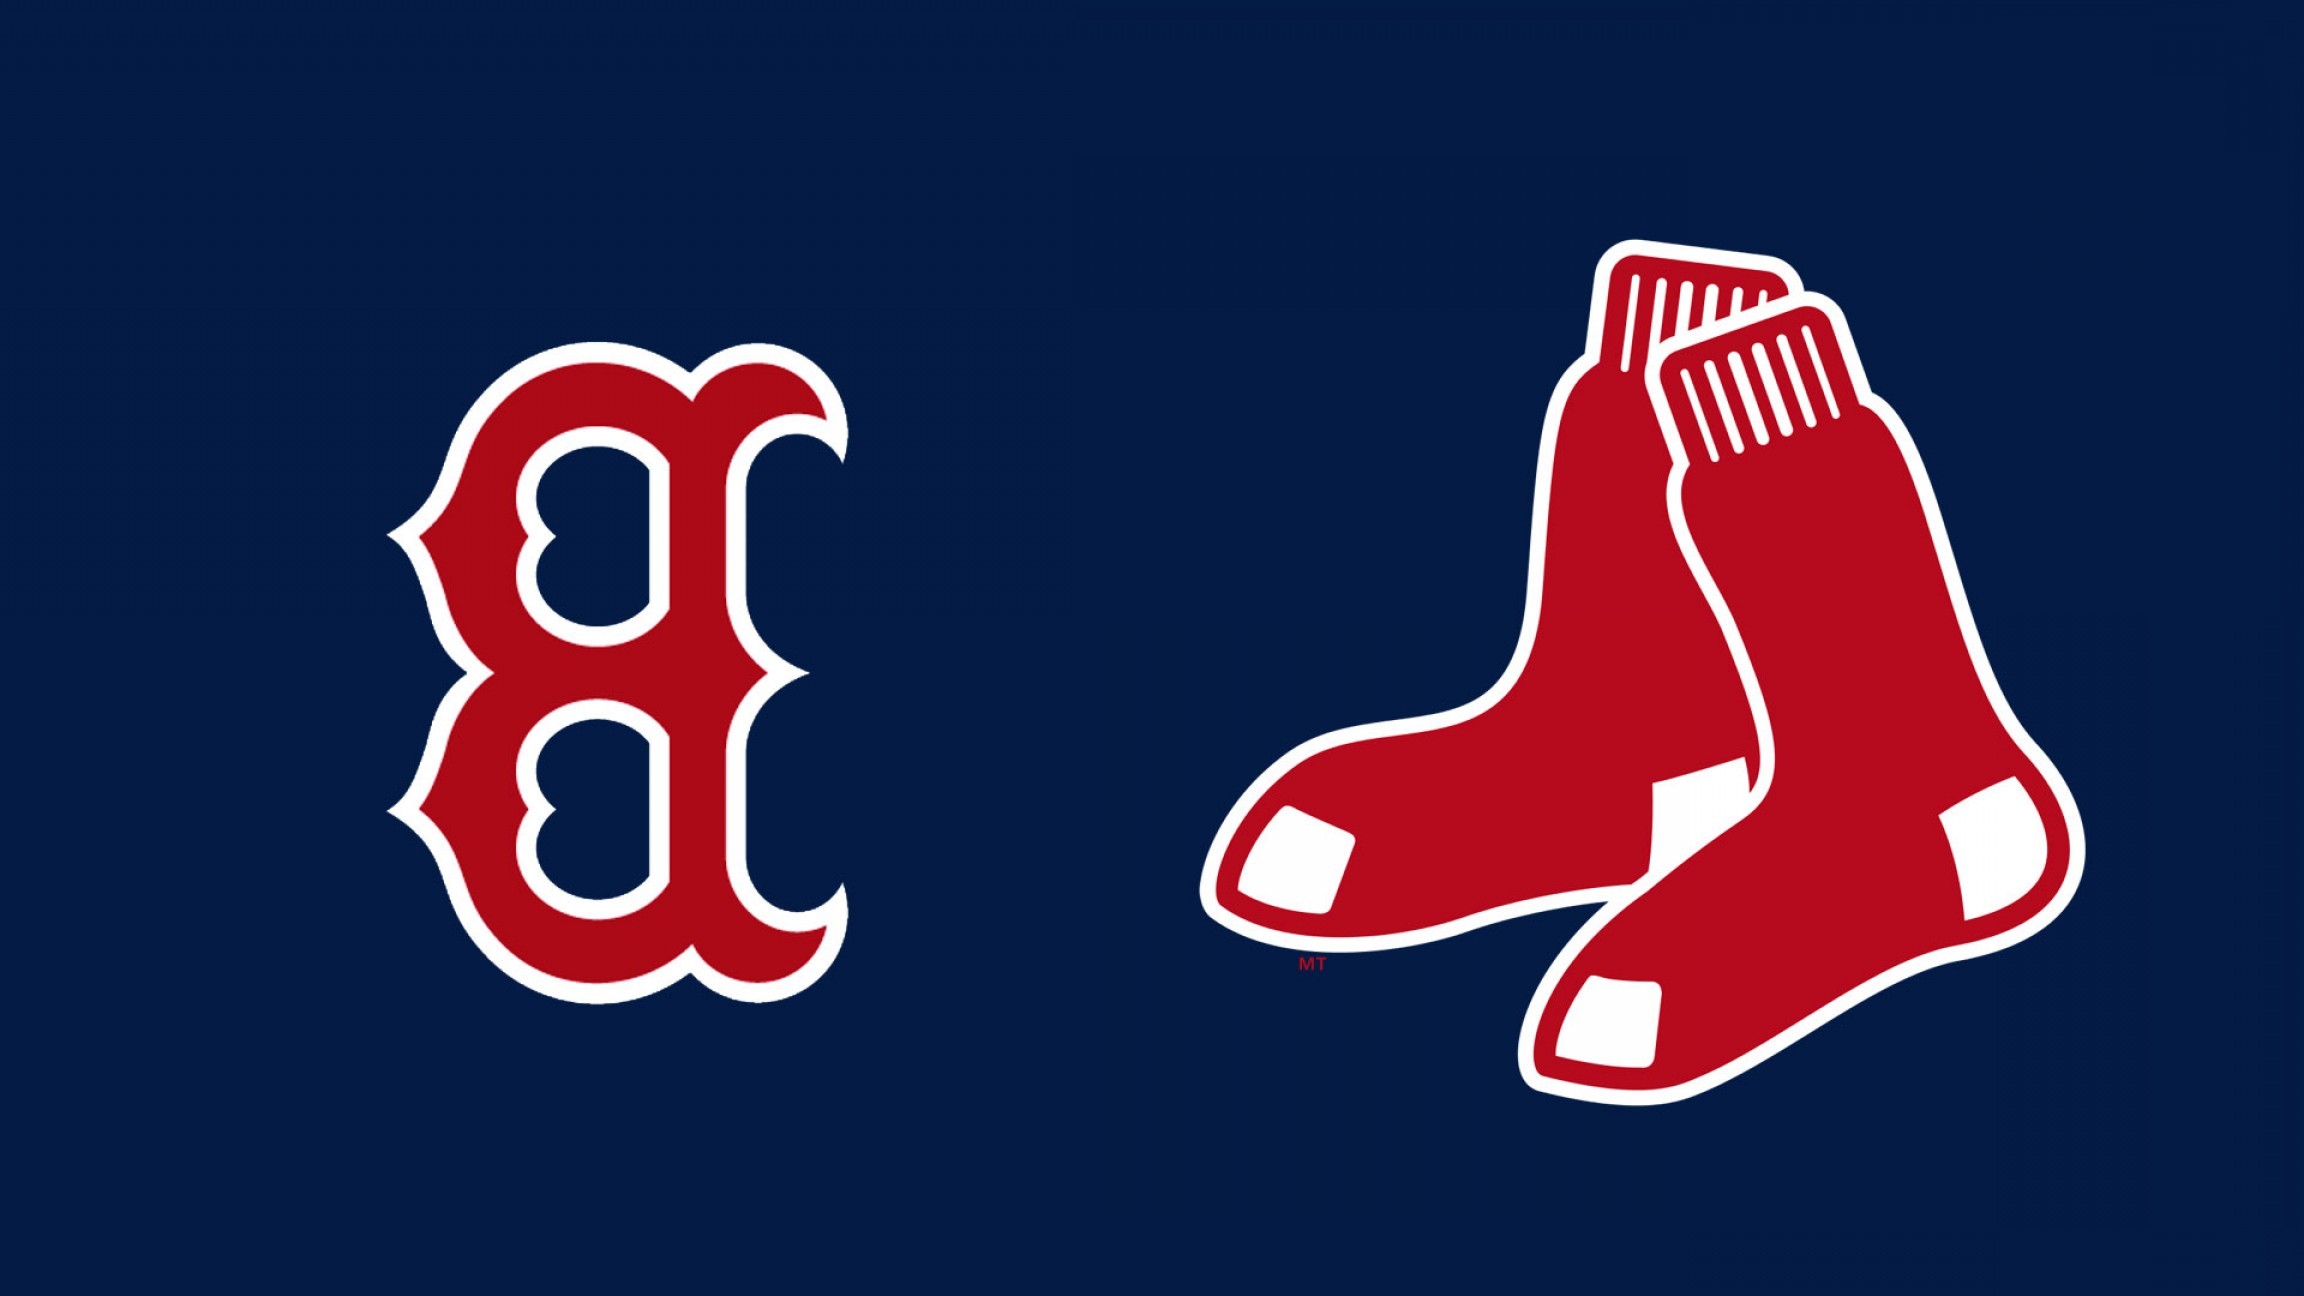 2304x1296 Red Sox Vector: Hd Boston Red Sox Wallpapers